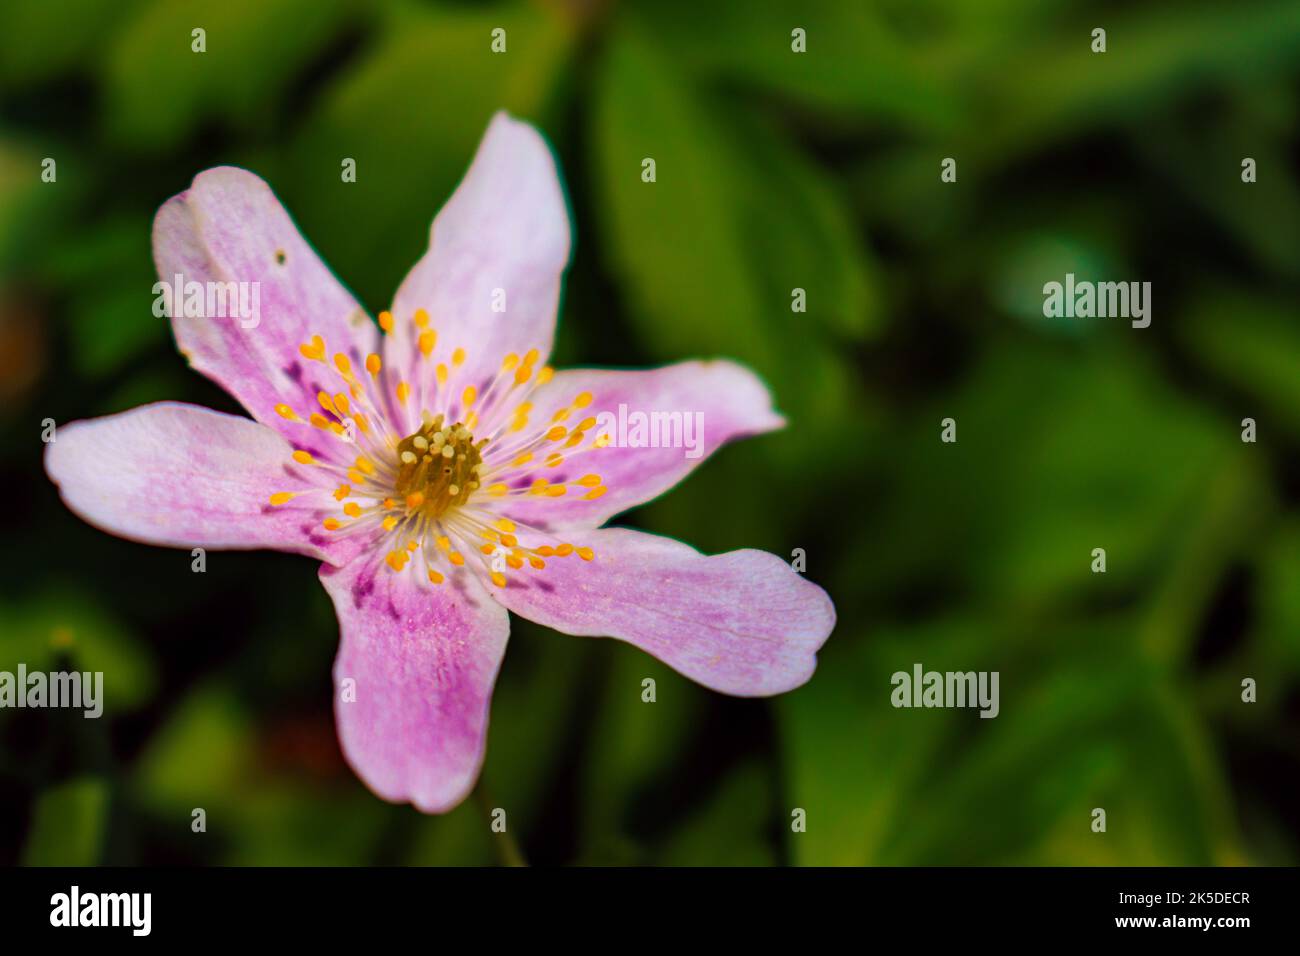 Close-up of beautiful wild pink Anemone growing in wooded areas Stock Photo